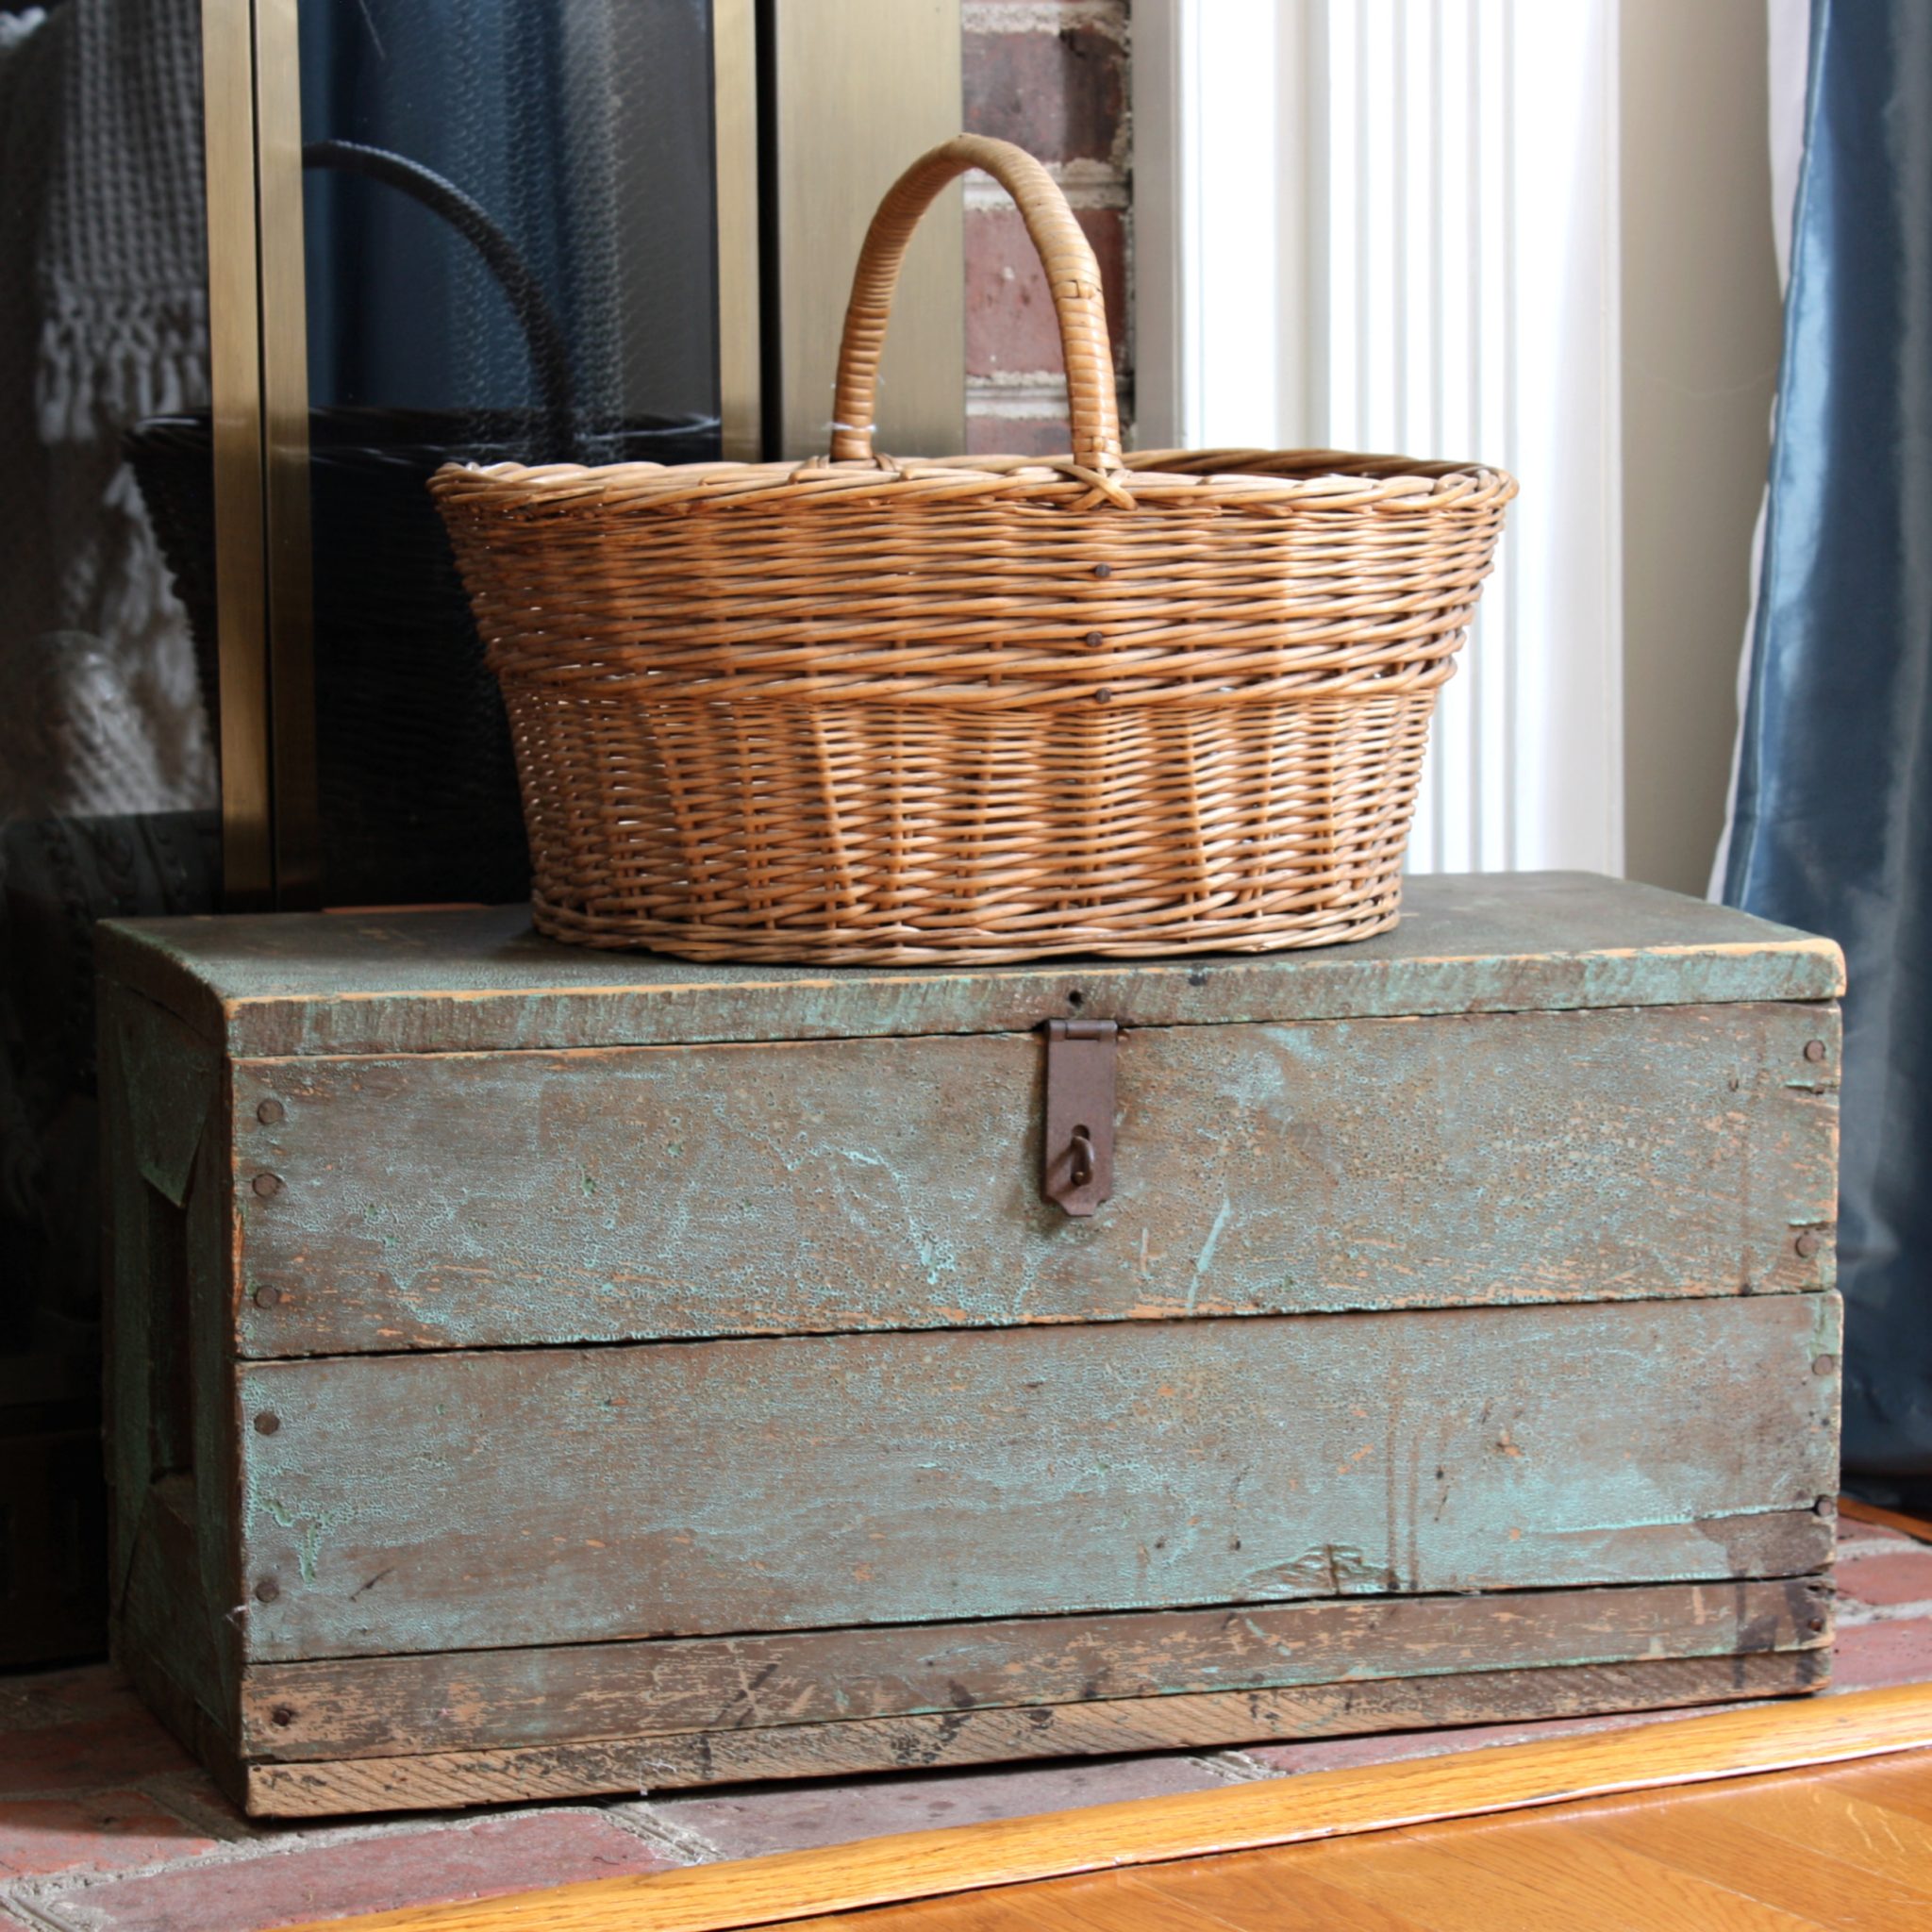 Decorating Ideas Using Vintage Crates and Baskets